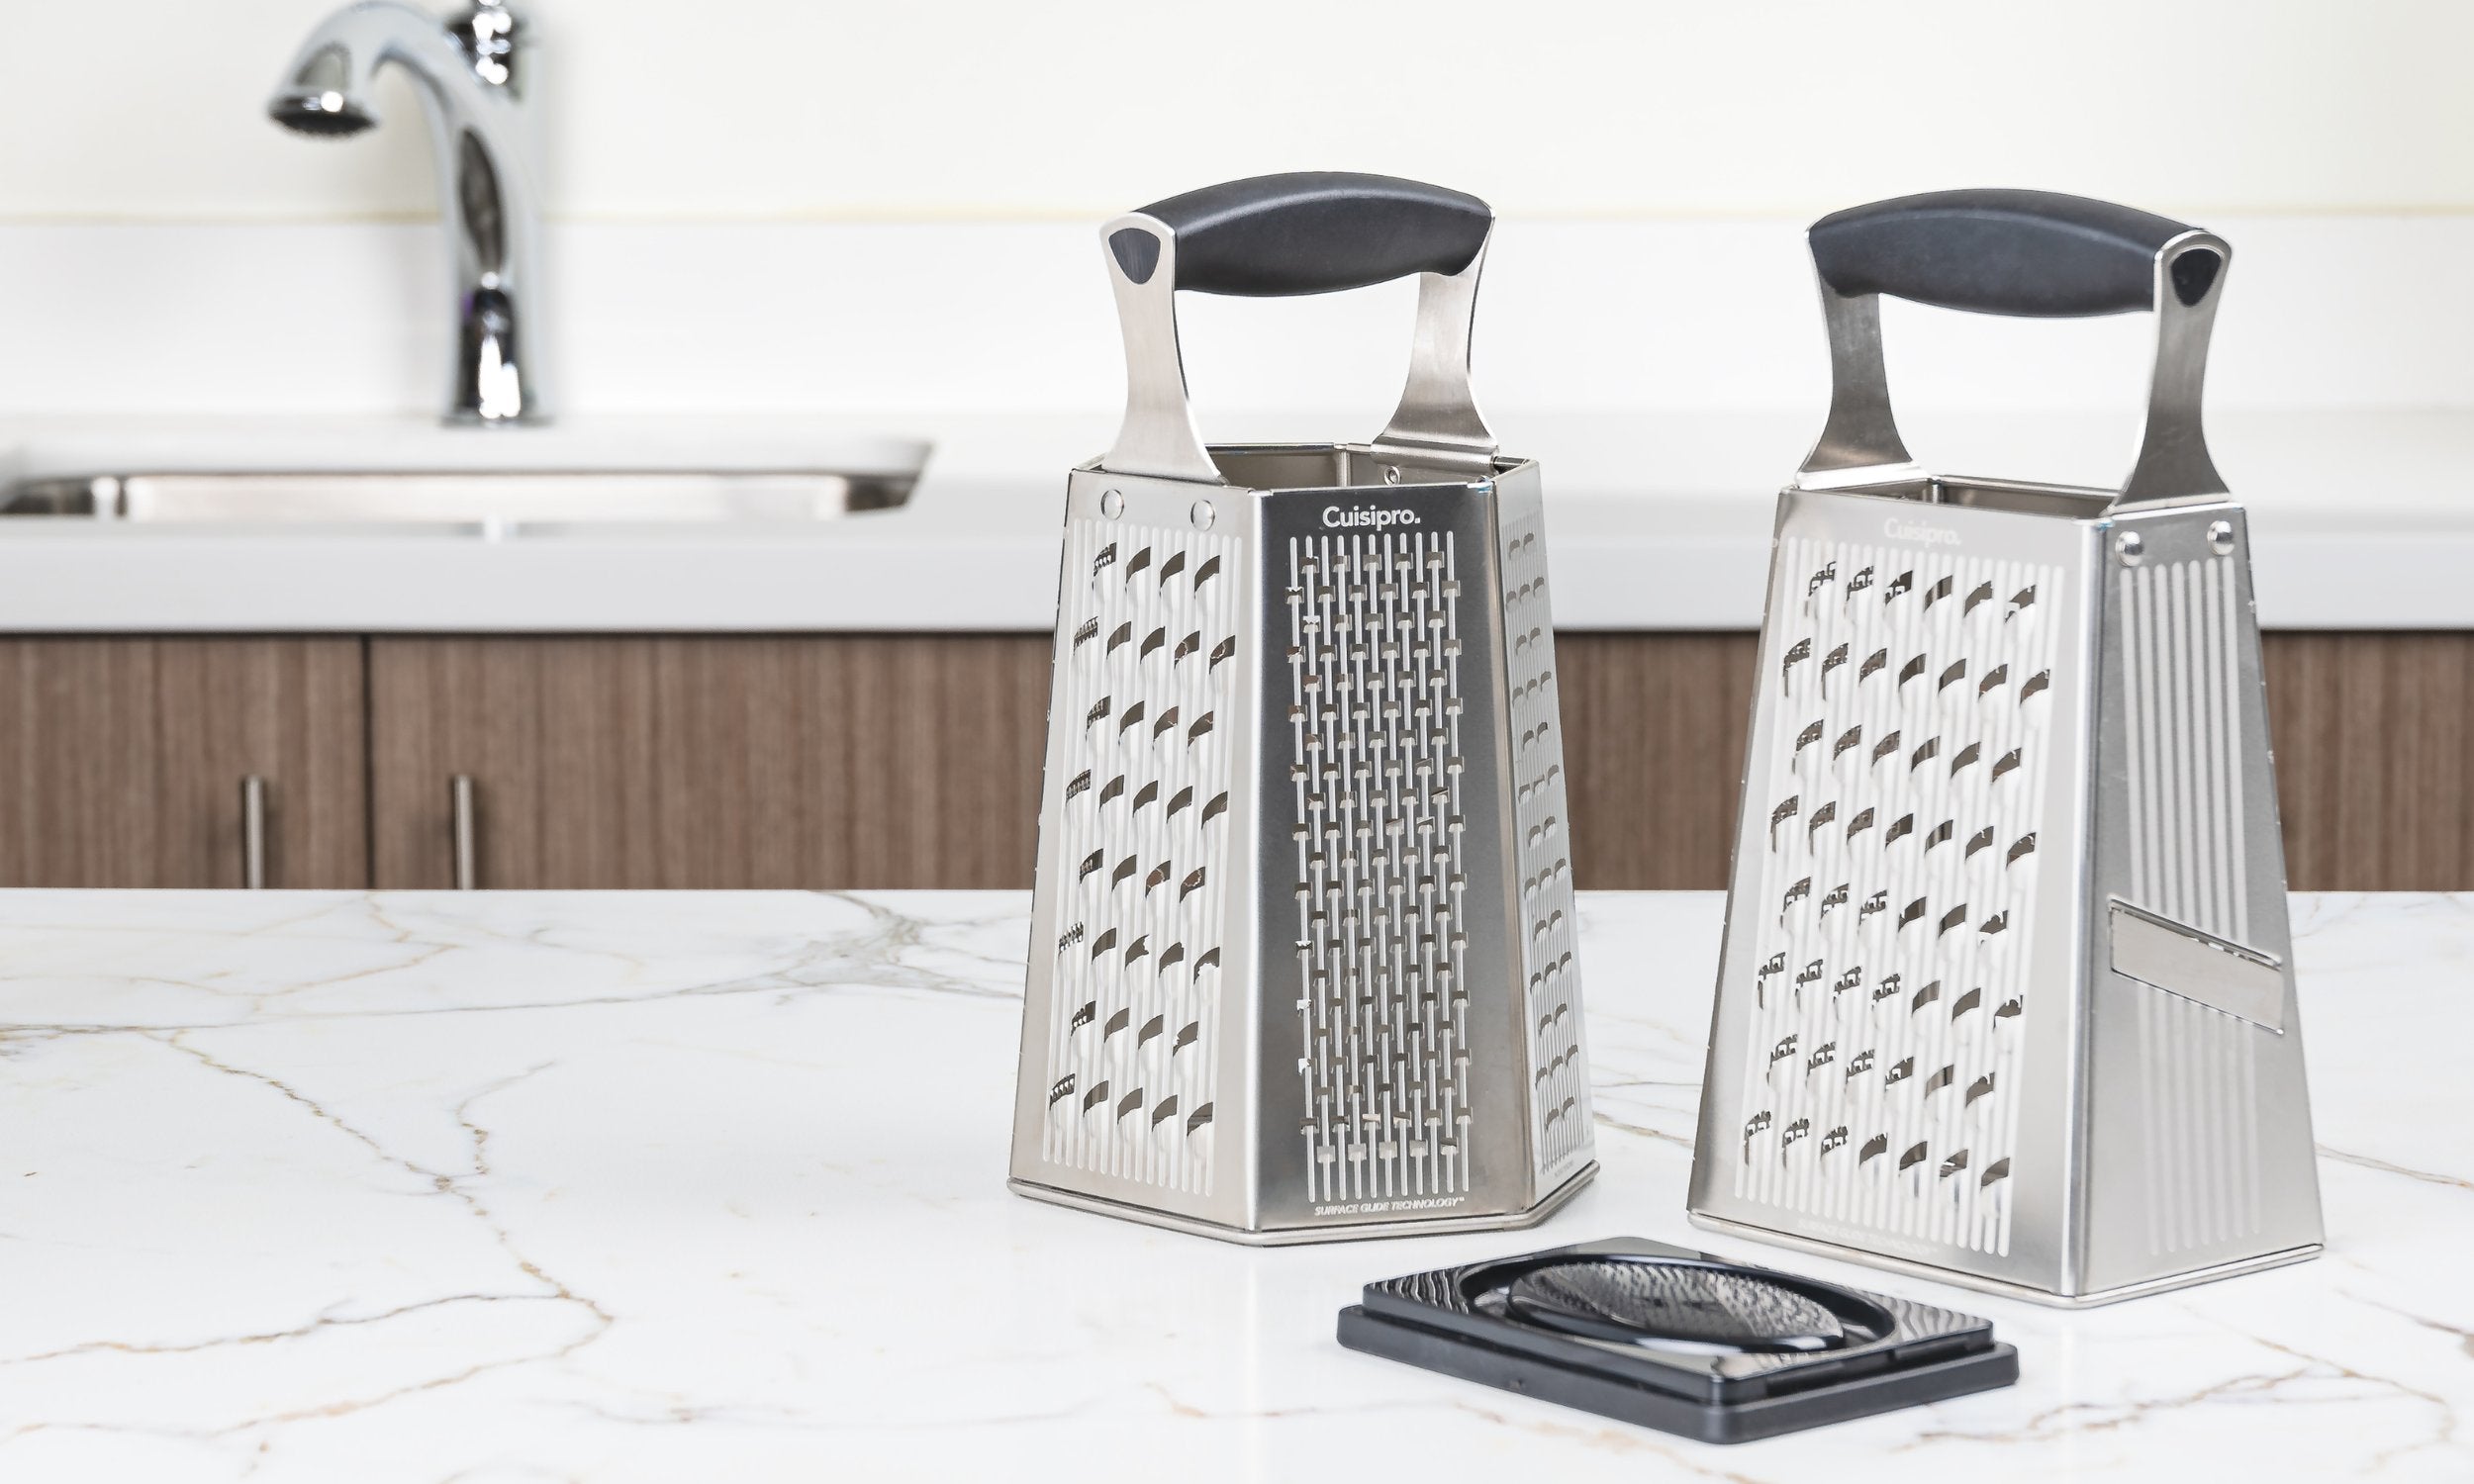 CUNSENR Professional Handheld Cheese Grater - Durable Cheese